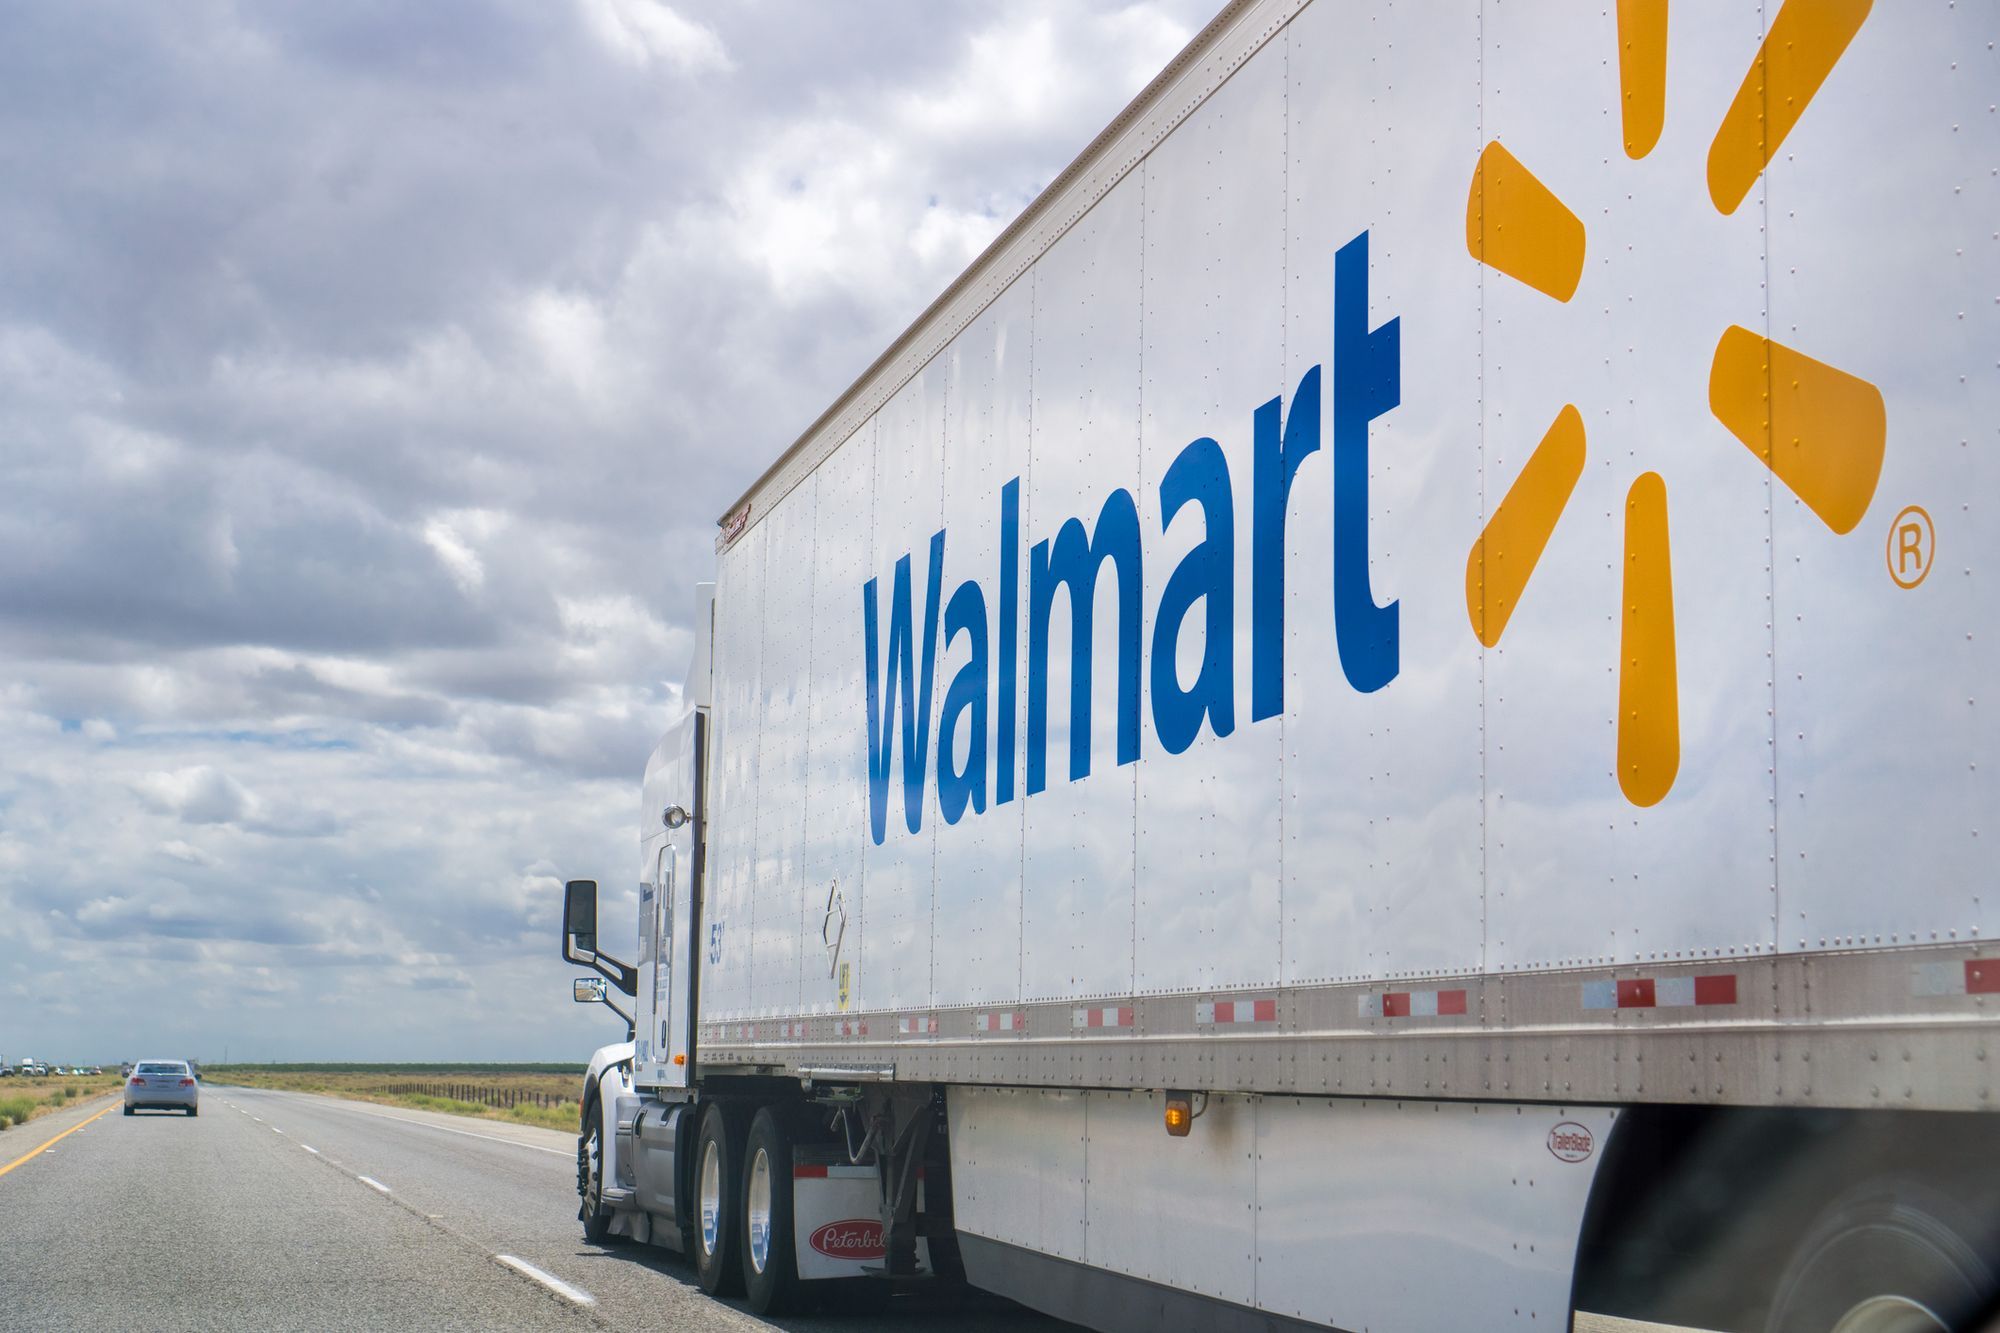 A Walmart truck hauling goods on the highway.